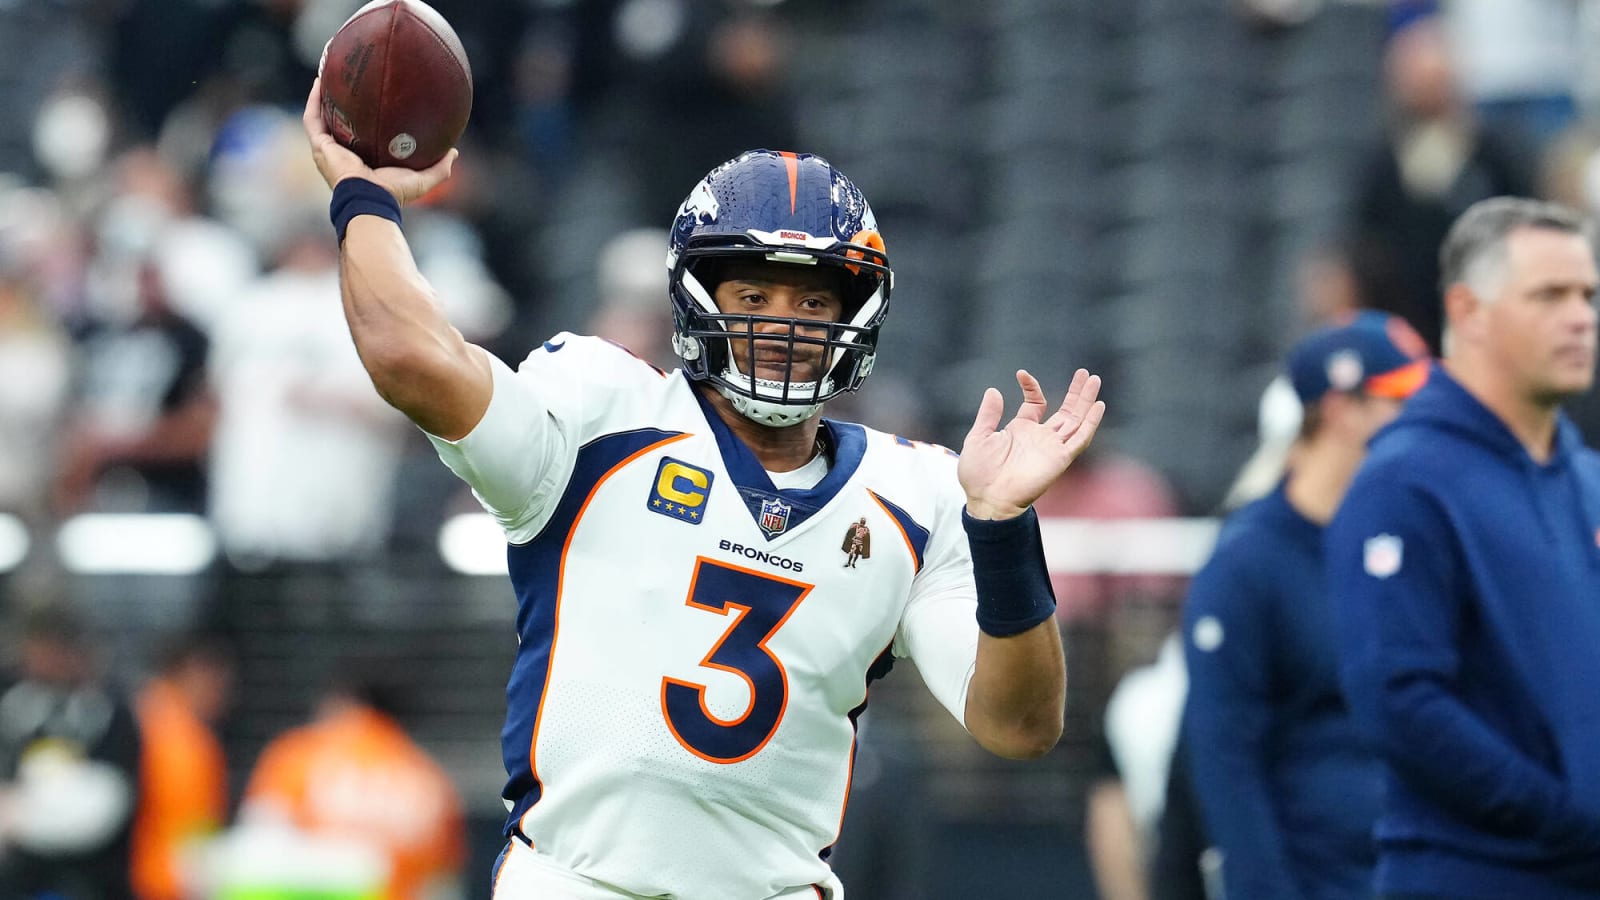 Steelers’ Russell Wilson Has Completely Fixed The Issues He Had In Denver: 'The Best Russell Wilson That They’ve Seen'